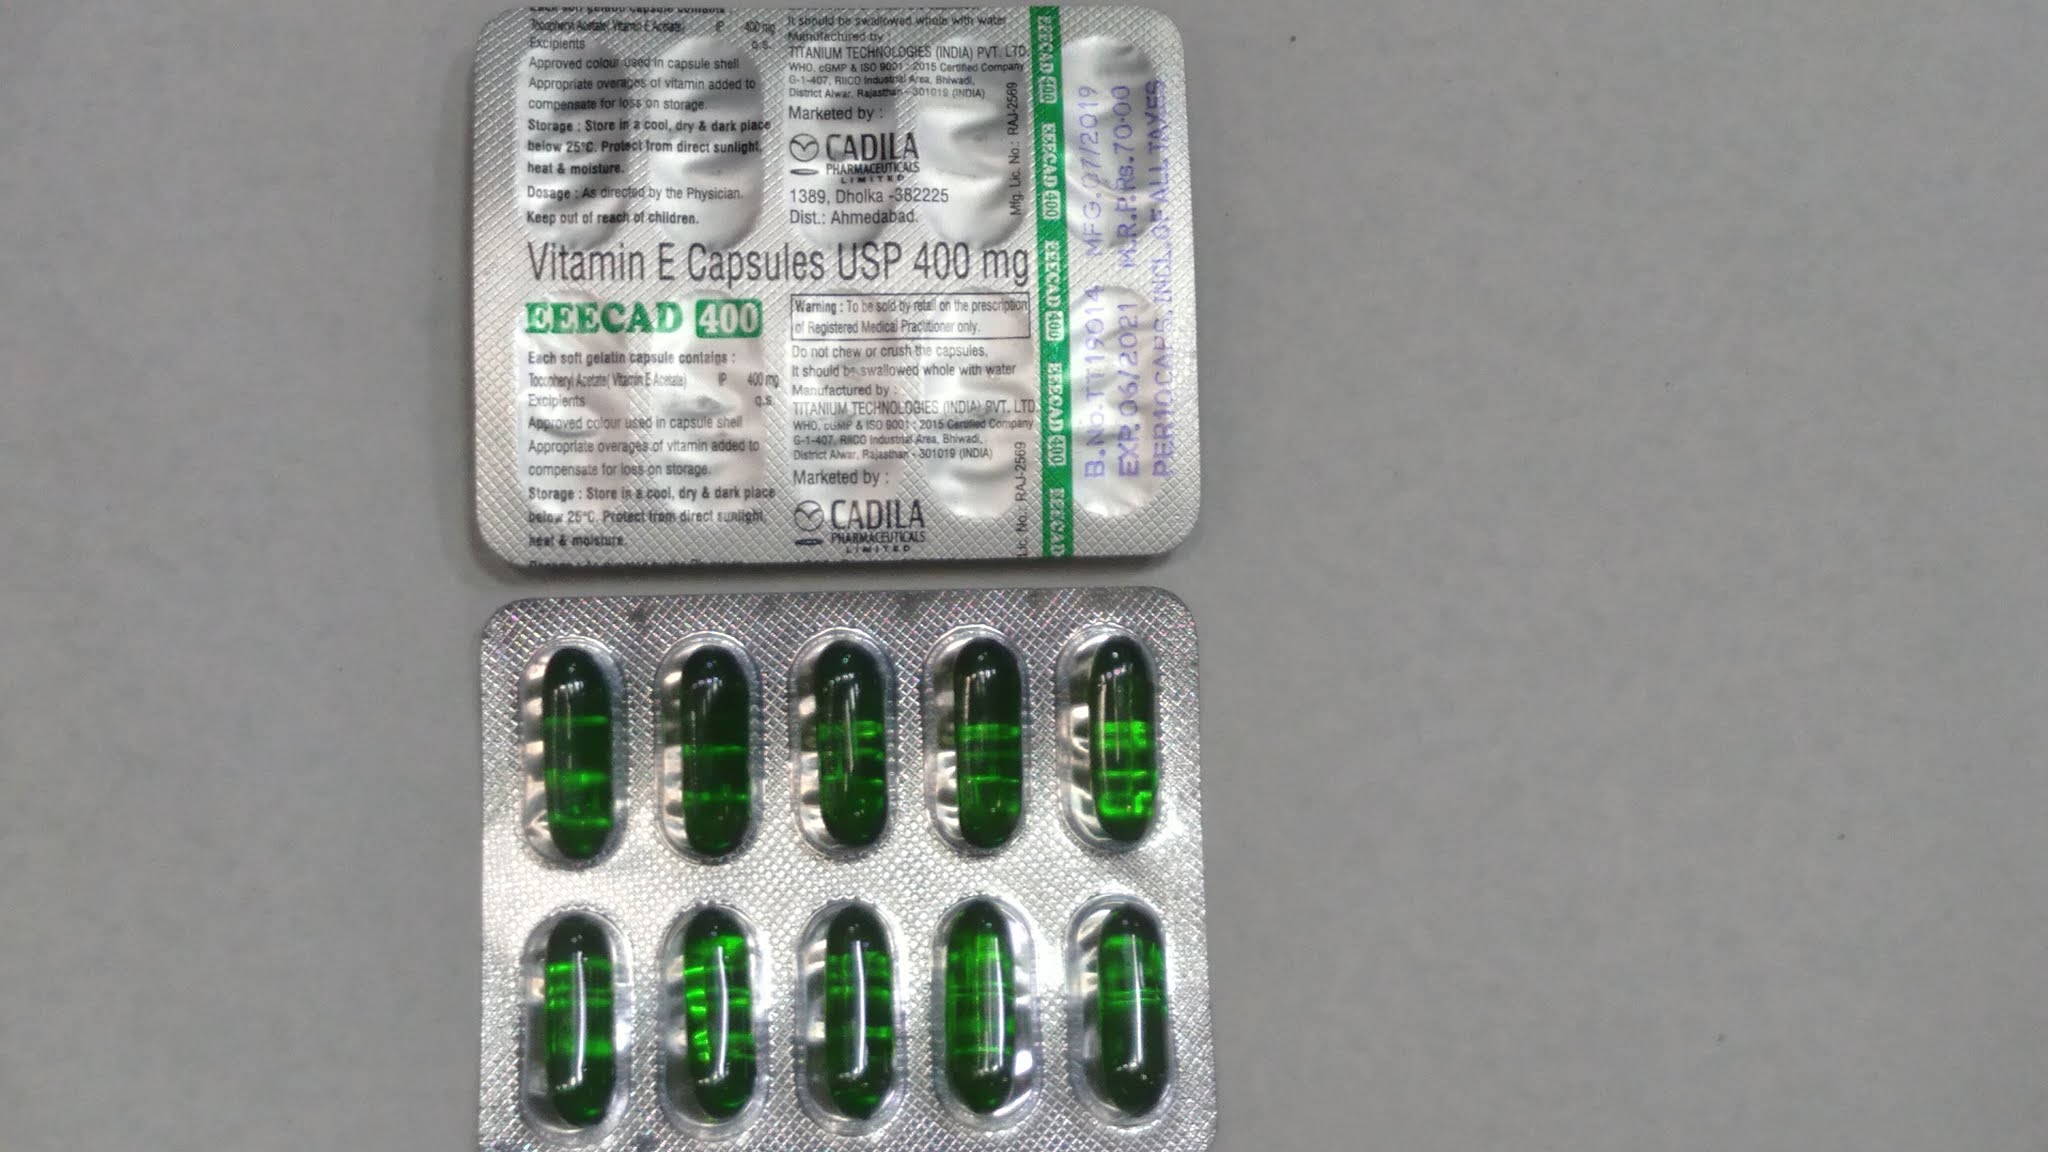 Eeecad 400 Vitamin E Capsule Uses Dosage Precautions And Sideeffects